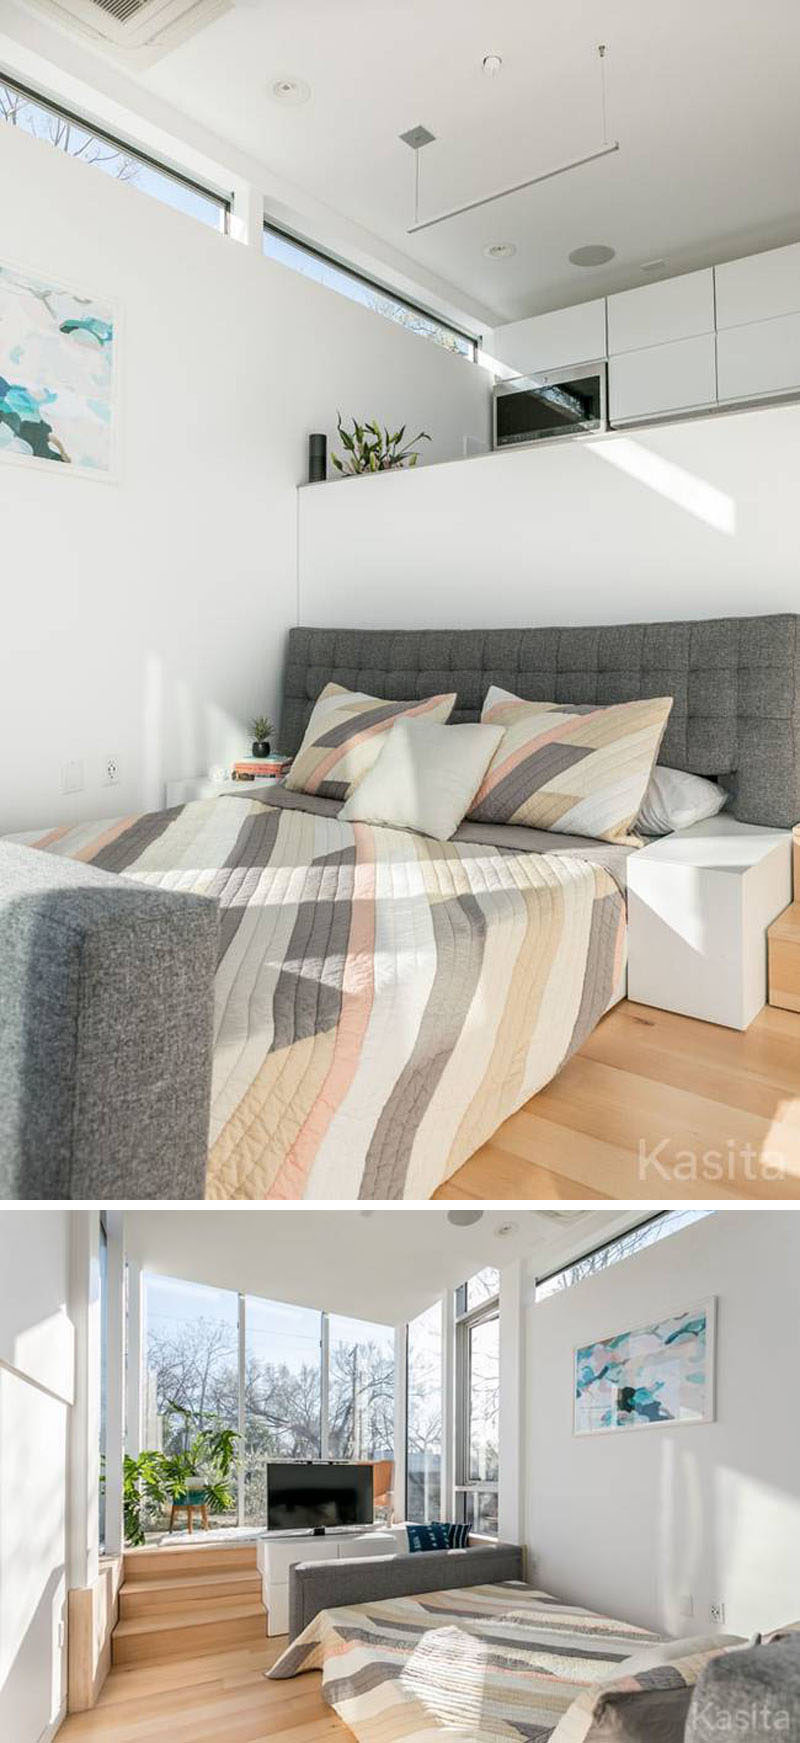 In this modern tiny house, the couch in the living room can be transformed into a queen-size bed by simply extending it out. Part of the couch frame now becomes bedside tables.